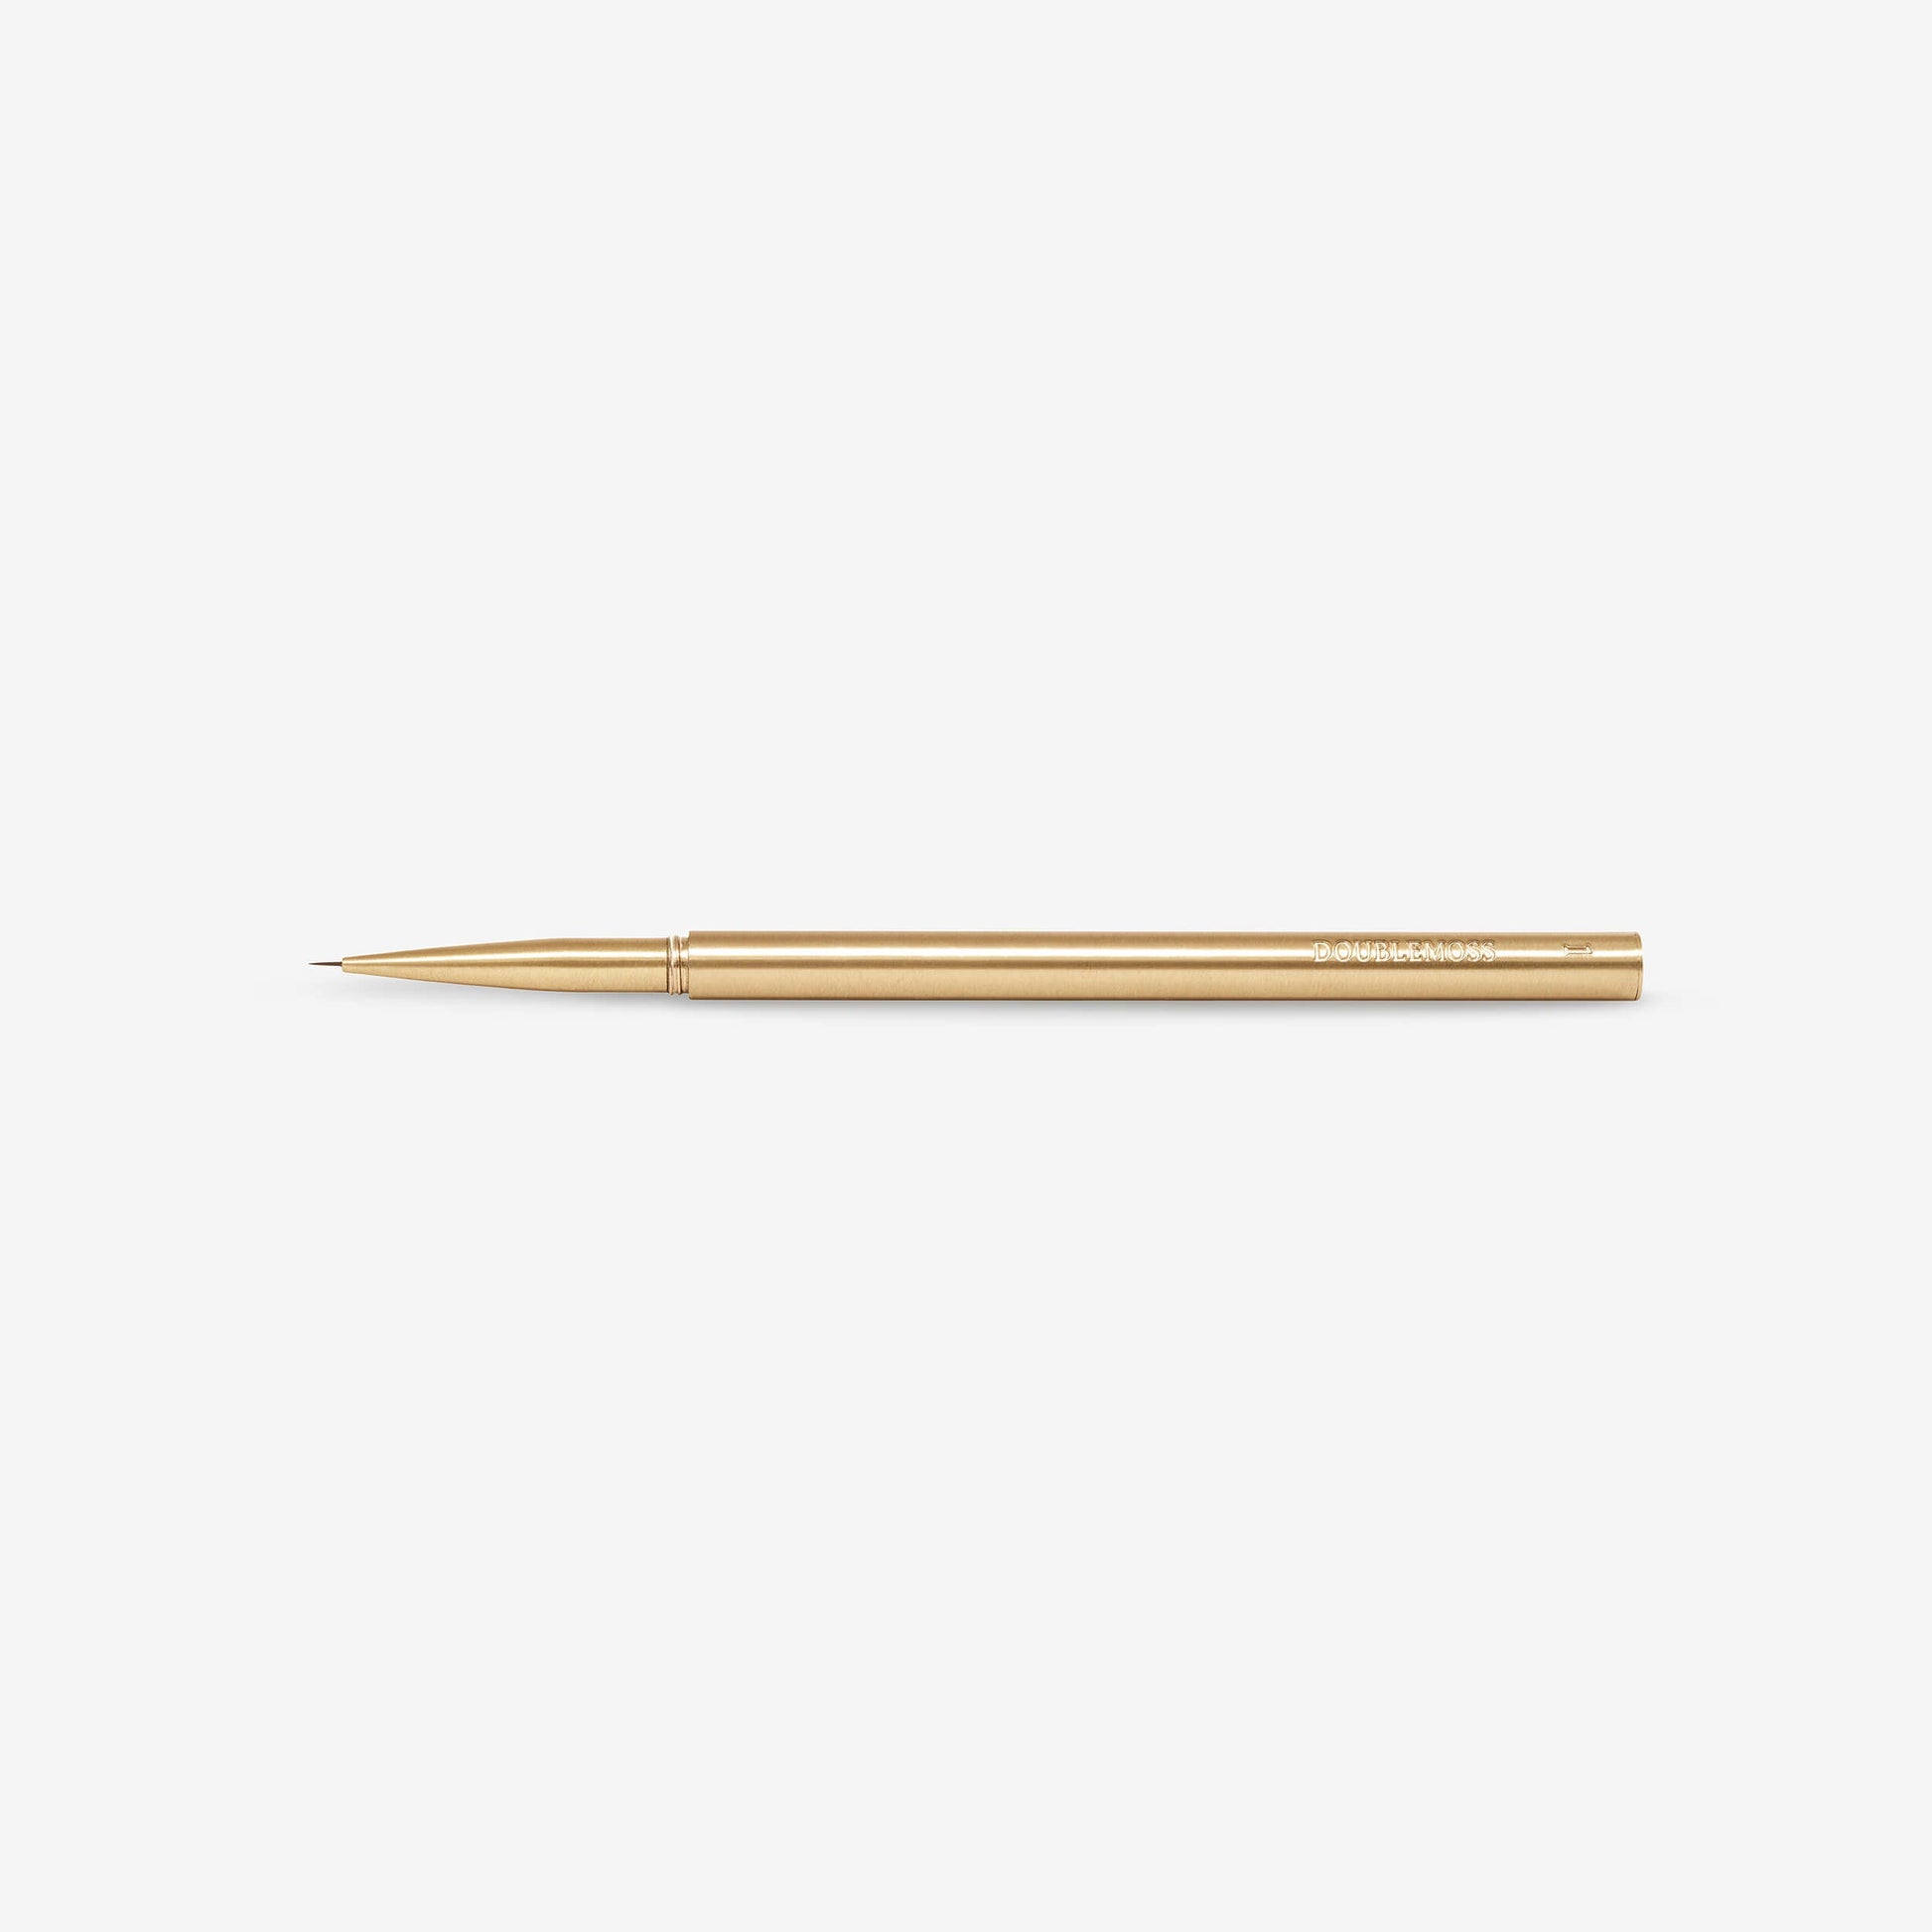 The Arte 1 Brush is a Nail Art Brushes -Brass -Brush- made by Doublemoss Arte